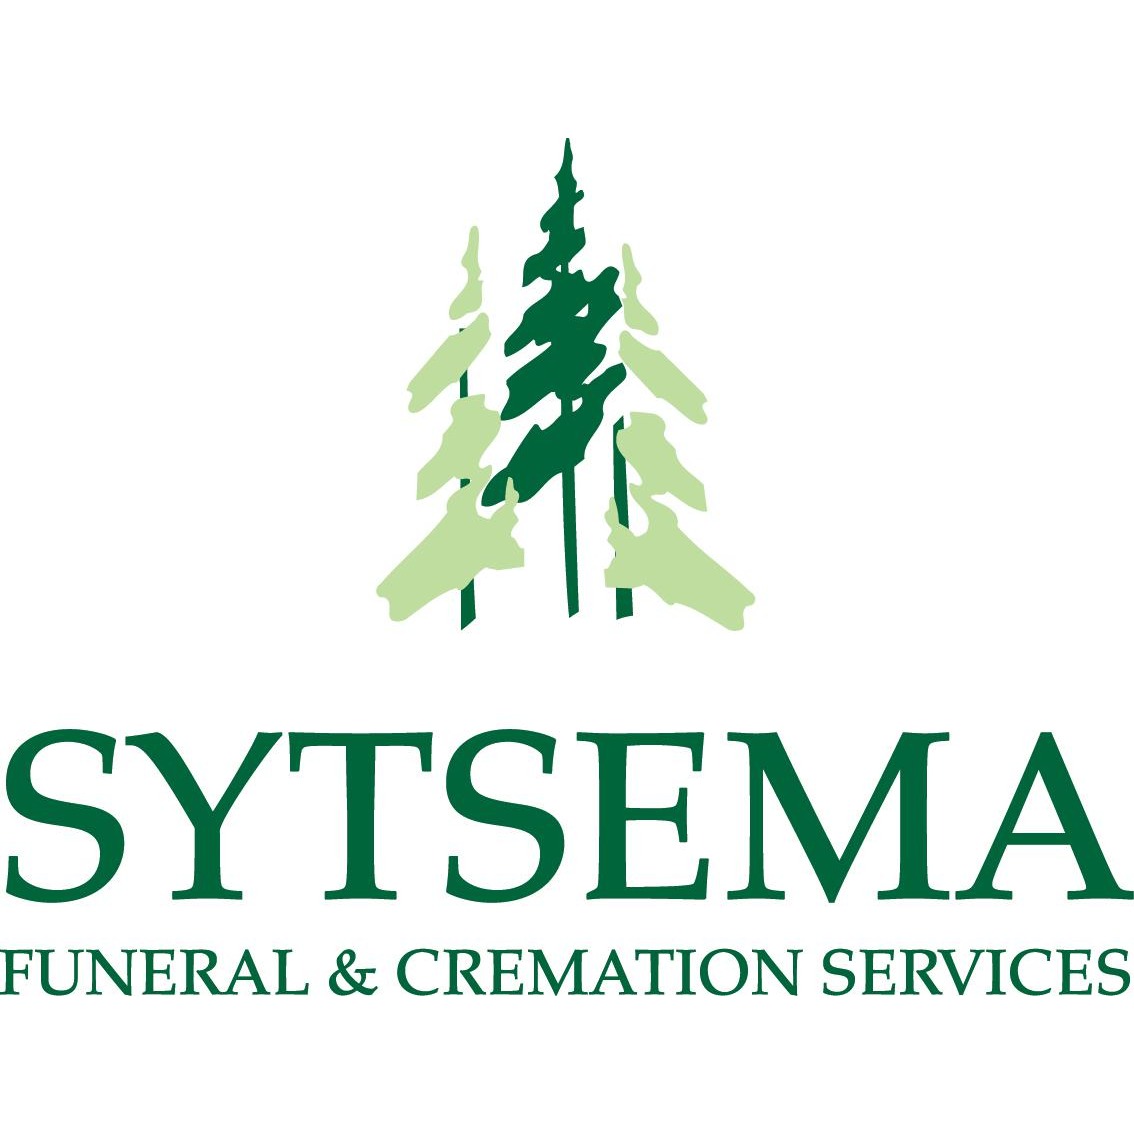 The Walburn Chapel of Sytsema Funeral & Cremation Services